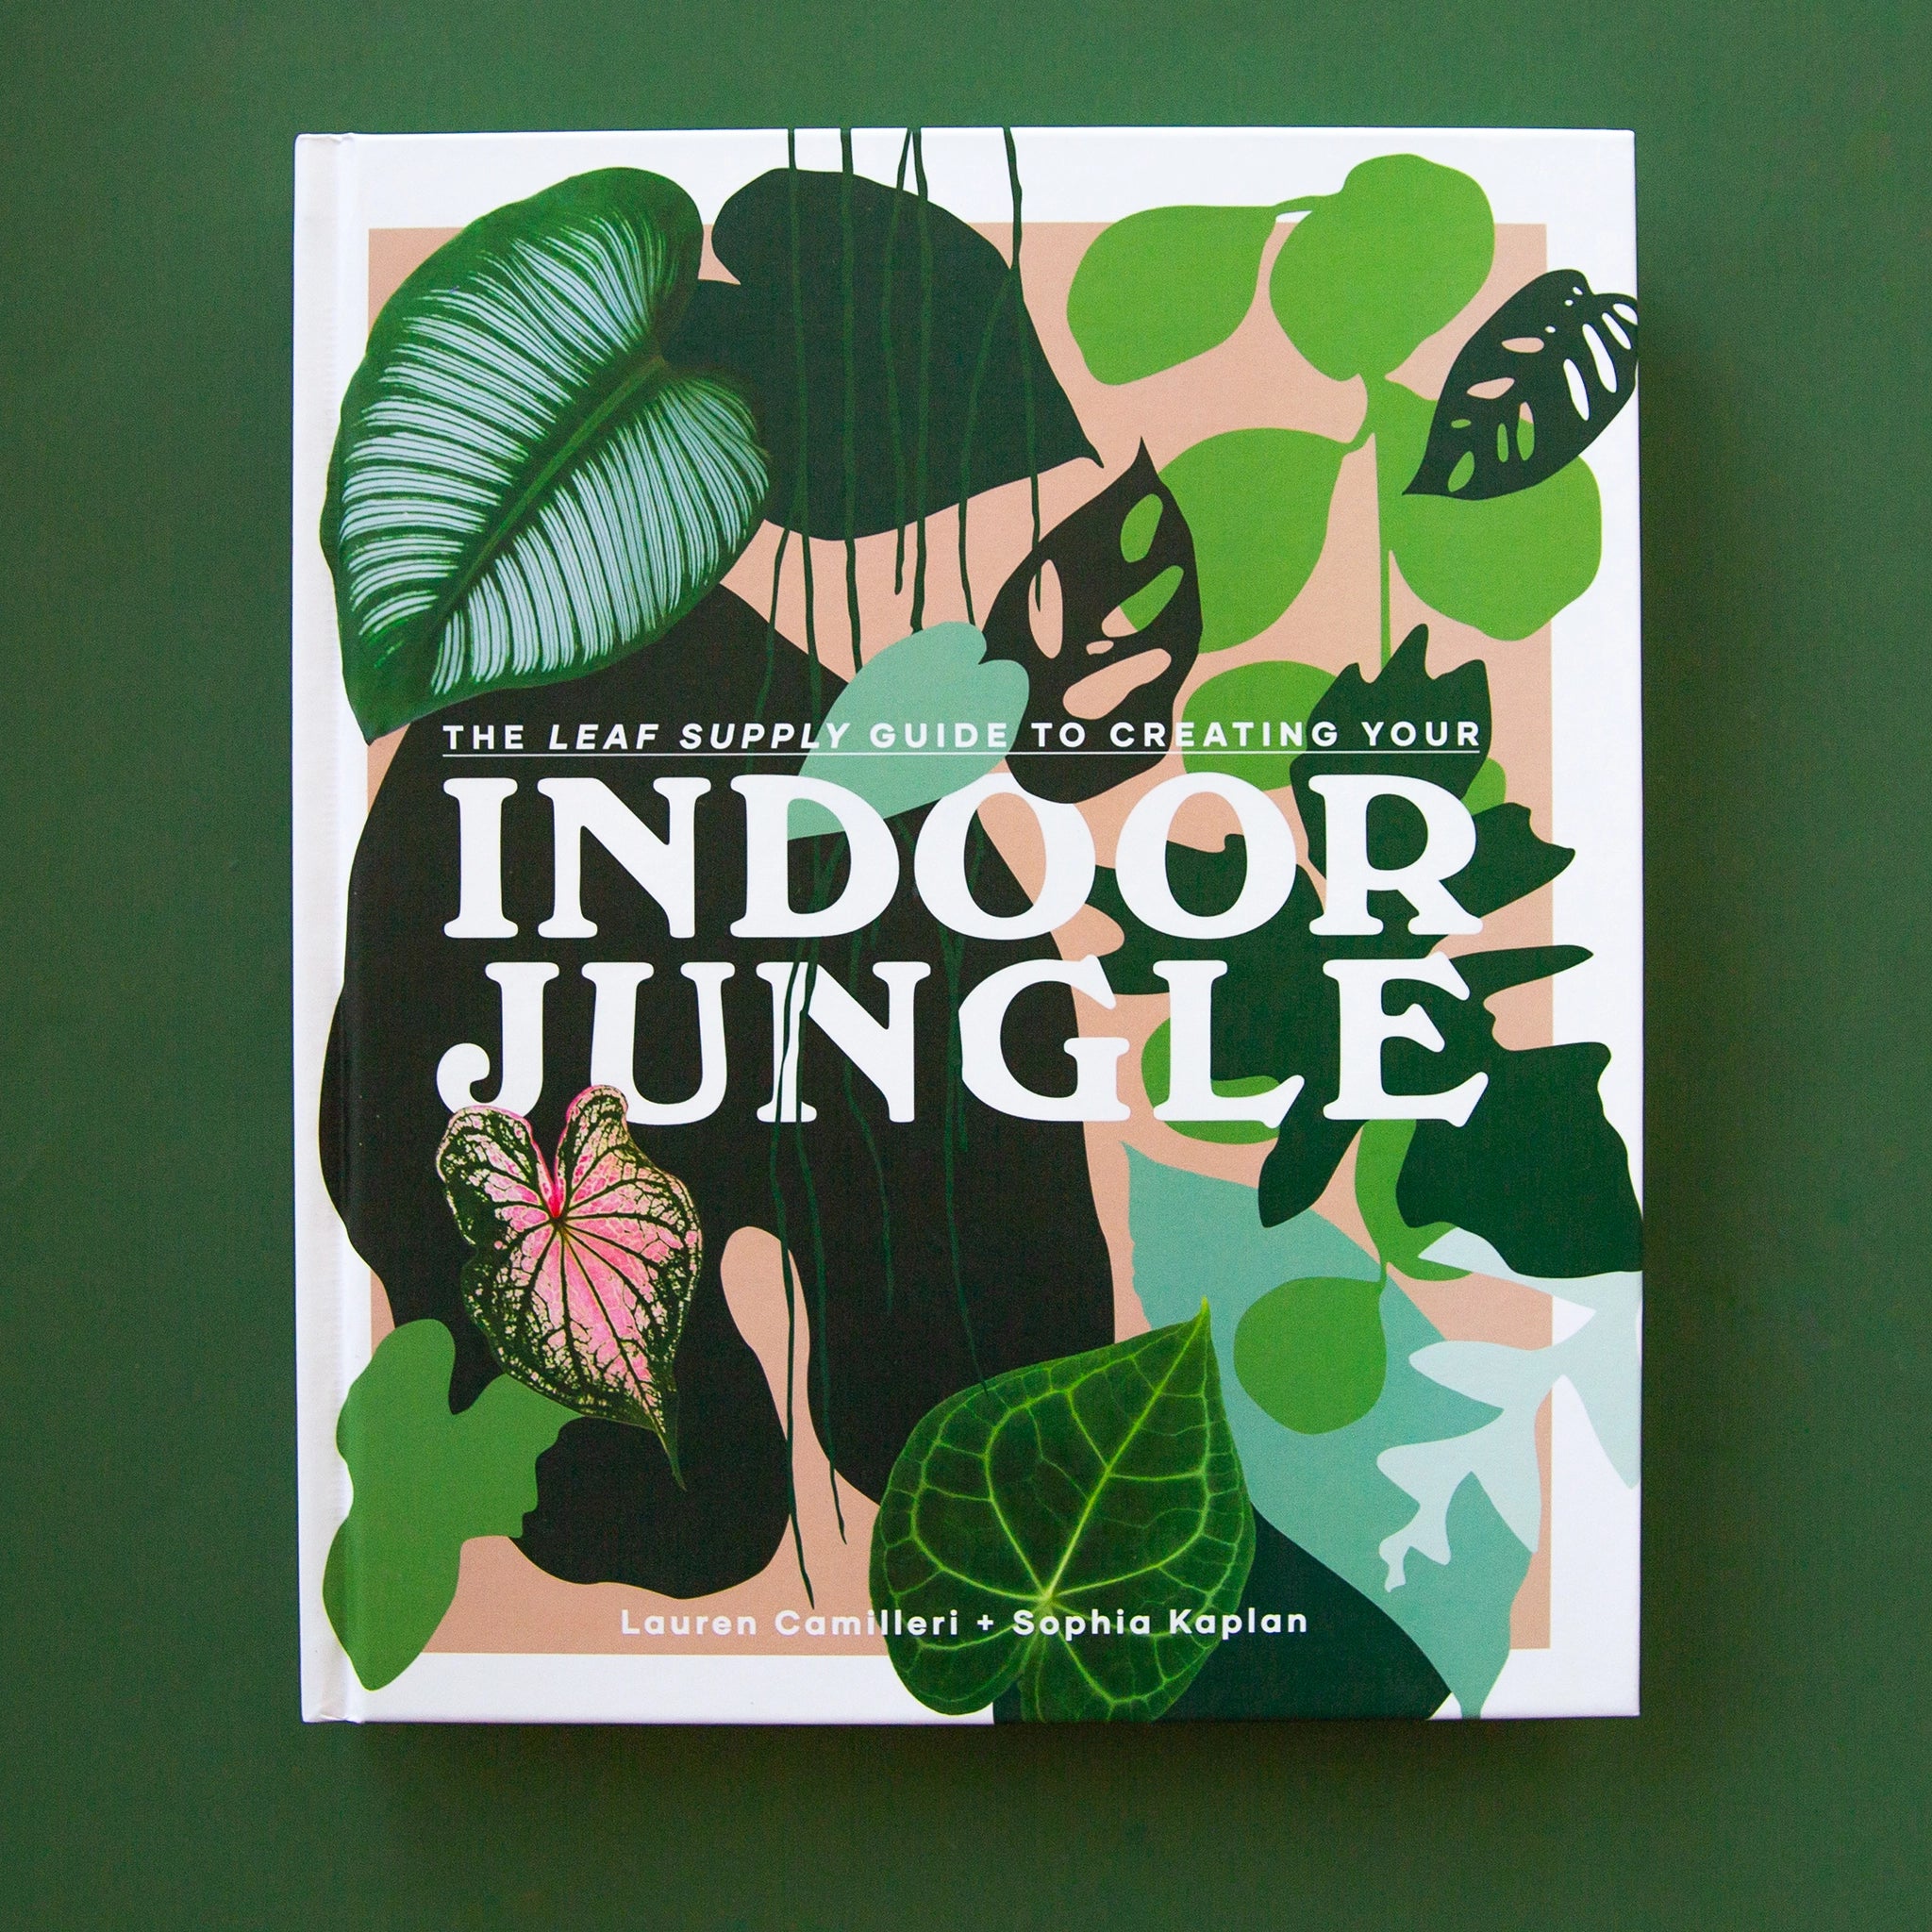 On a green background is a pink and green book cover with a white border and various illustrations of green house plant leaves as well as the title of the book that reads, &quot;The Leaf Supply Guide To Creating Your Indoor Jungle&quot; in white letters.